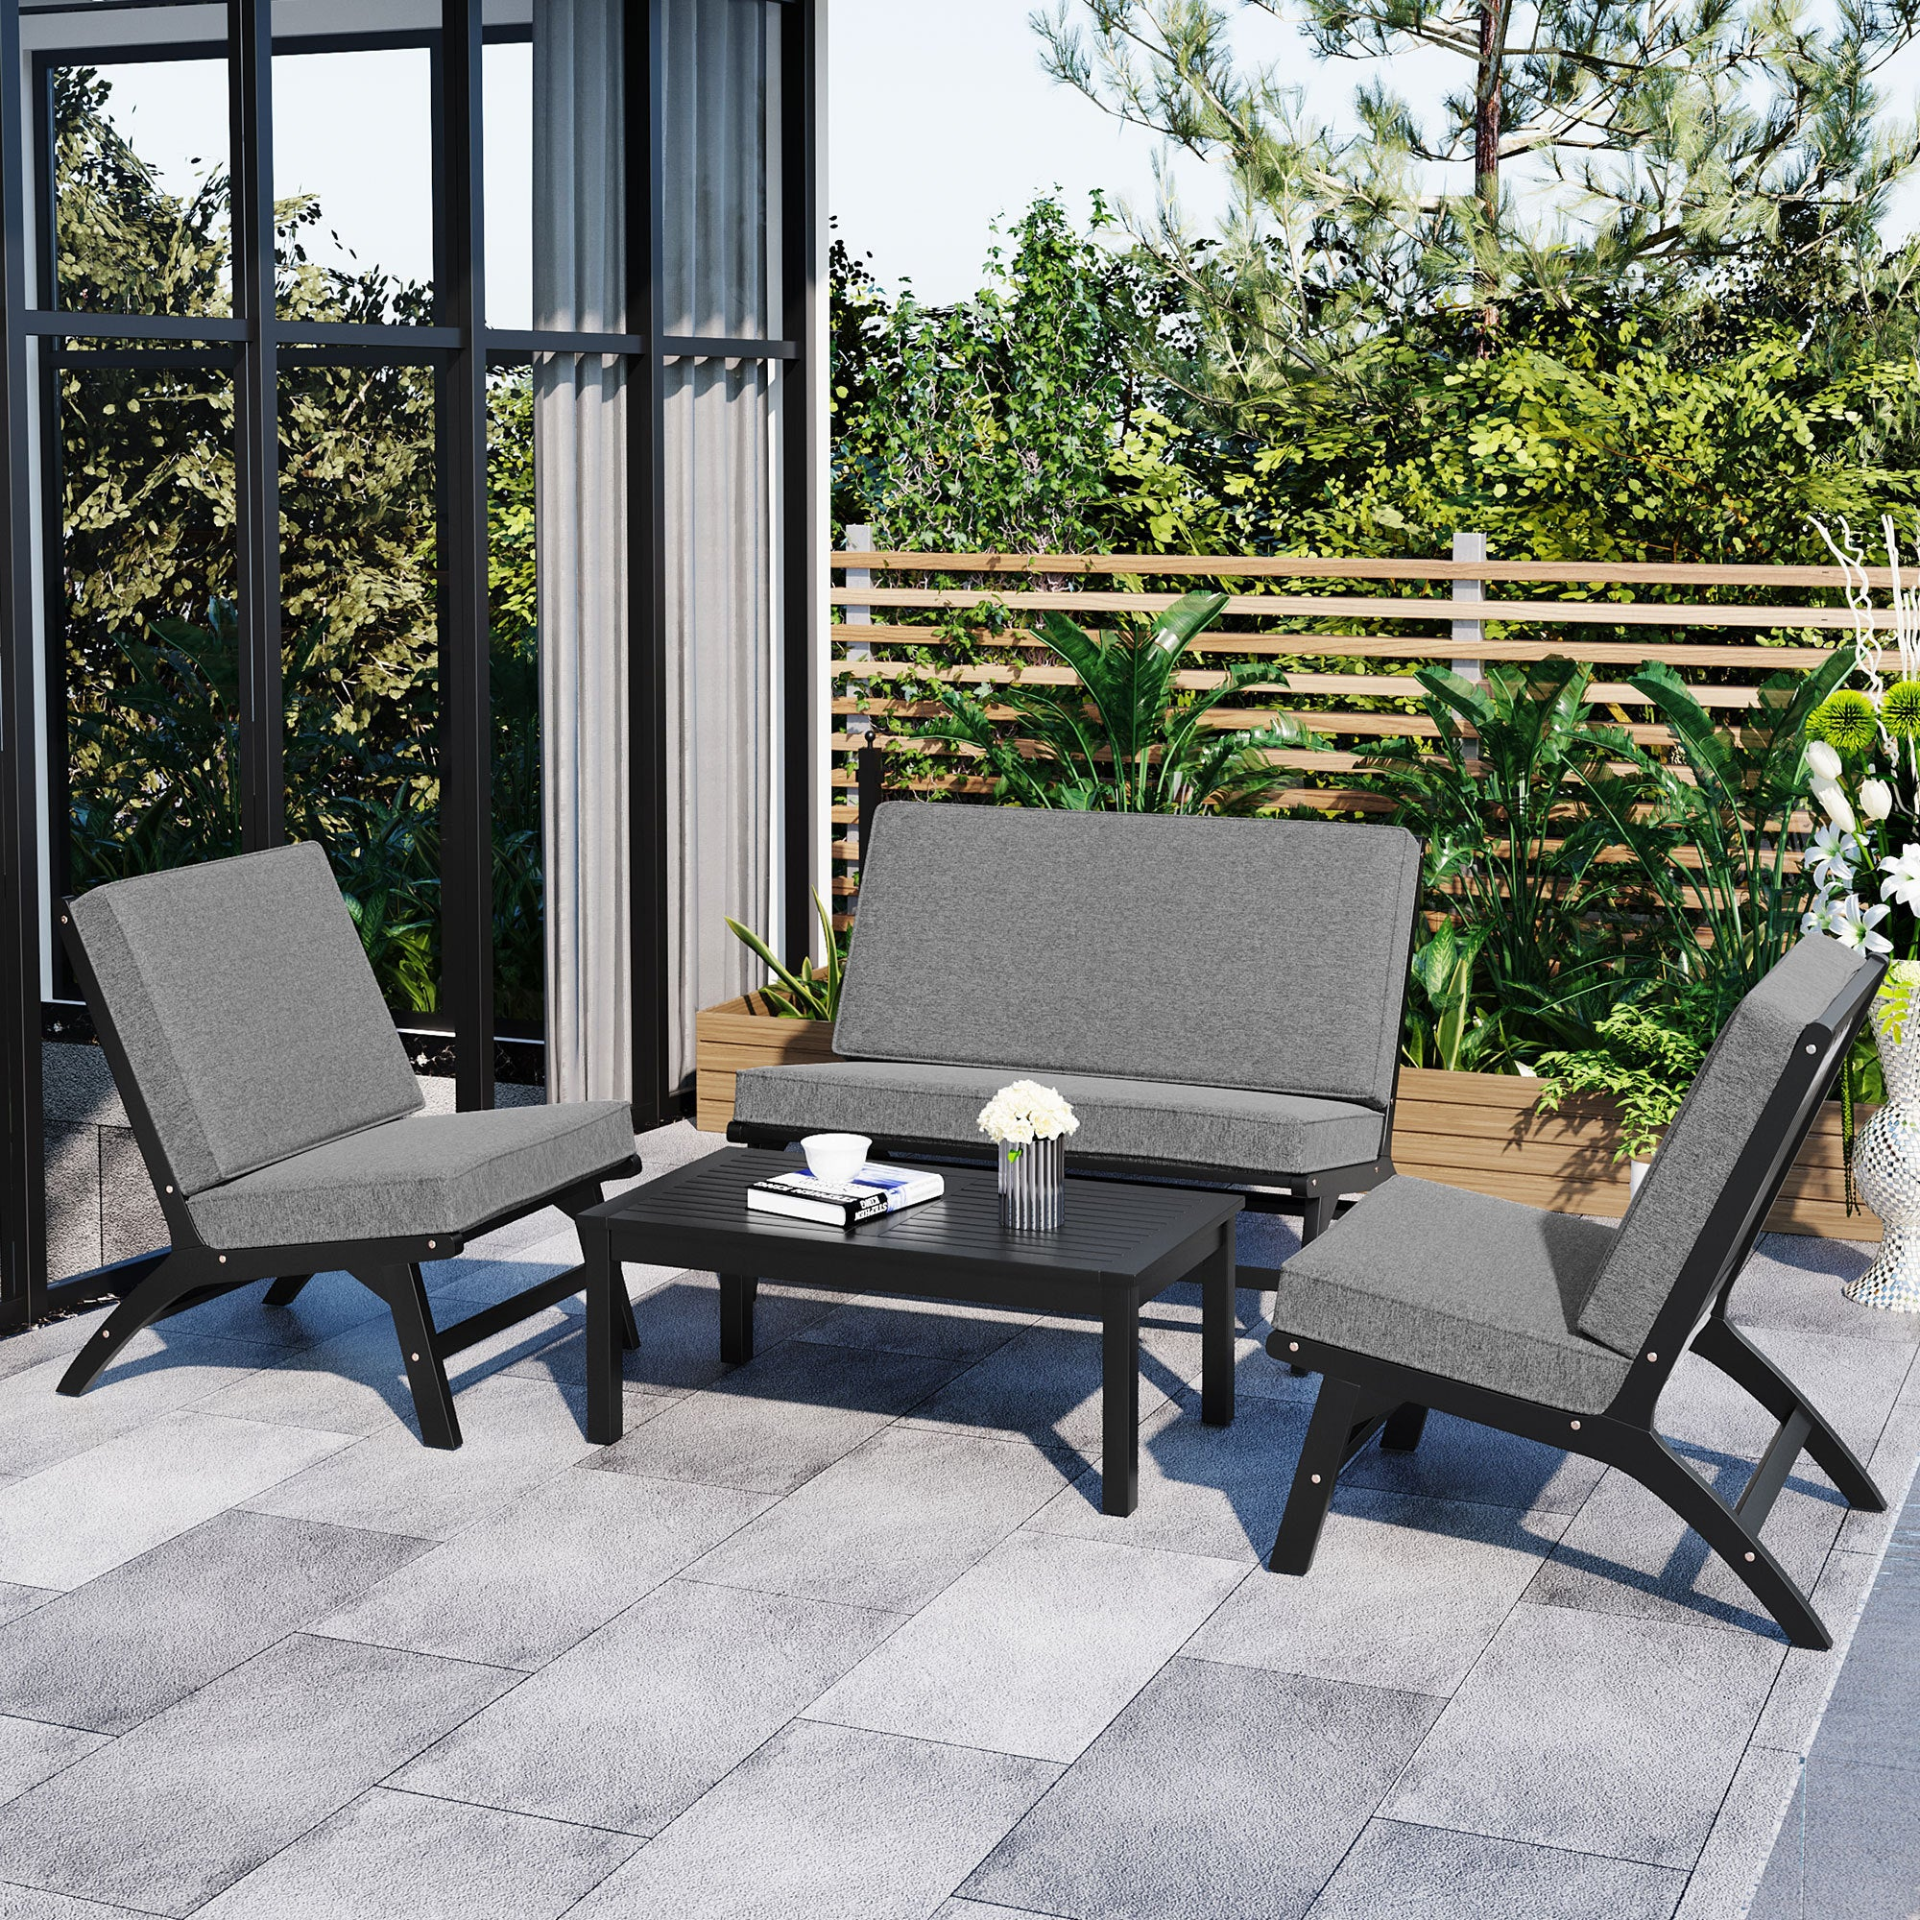 4-Piece V-shaped Seats set, Acacia Solid Wood Outdoor Sofa, Garden Furniture, Outdoor seating, Black And Gray